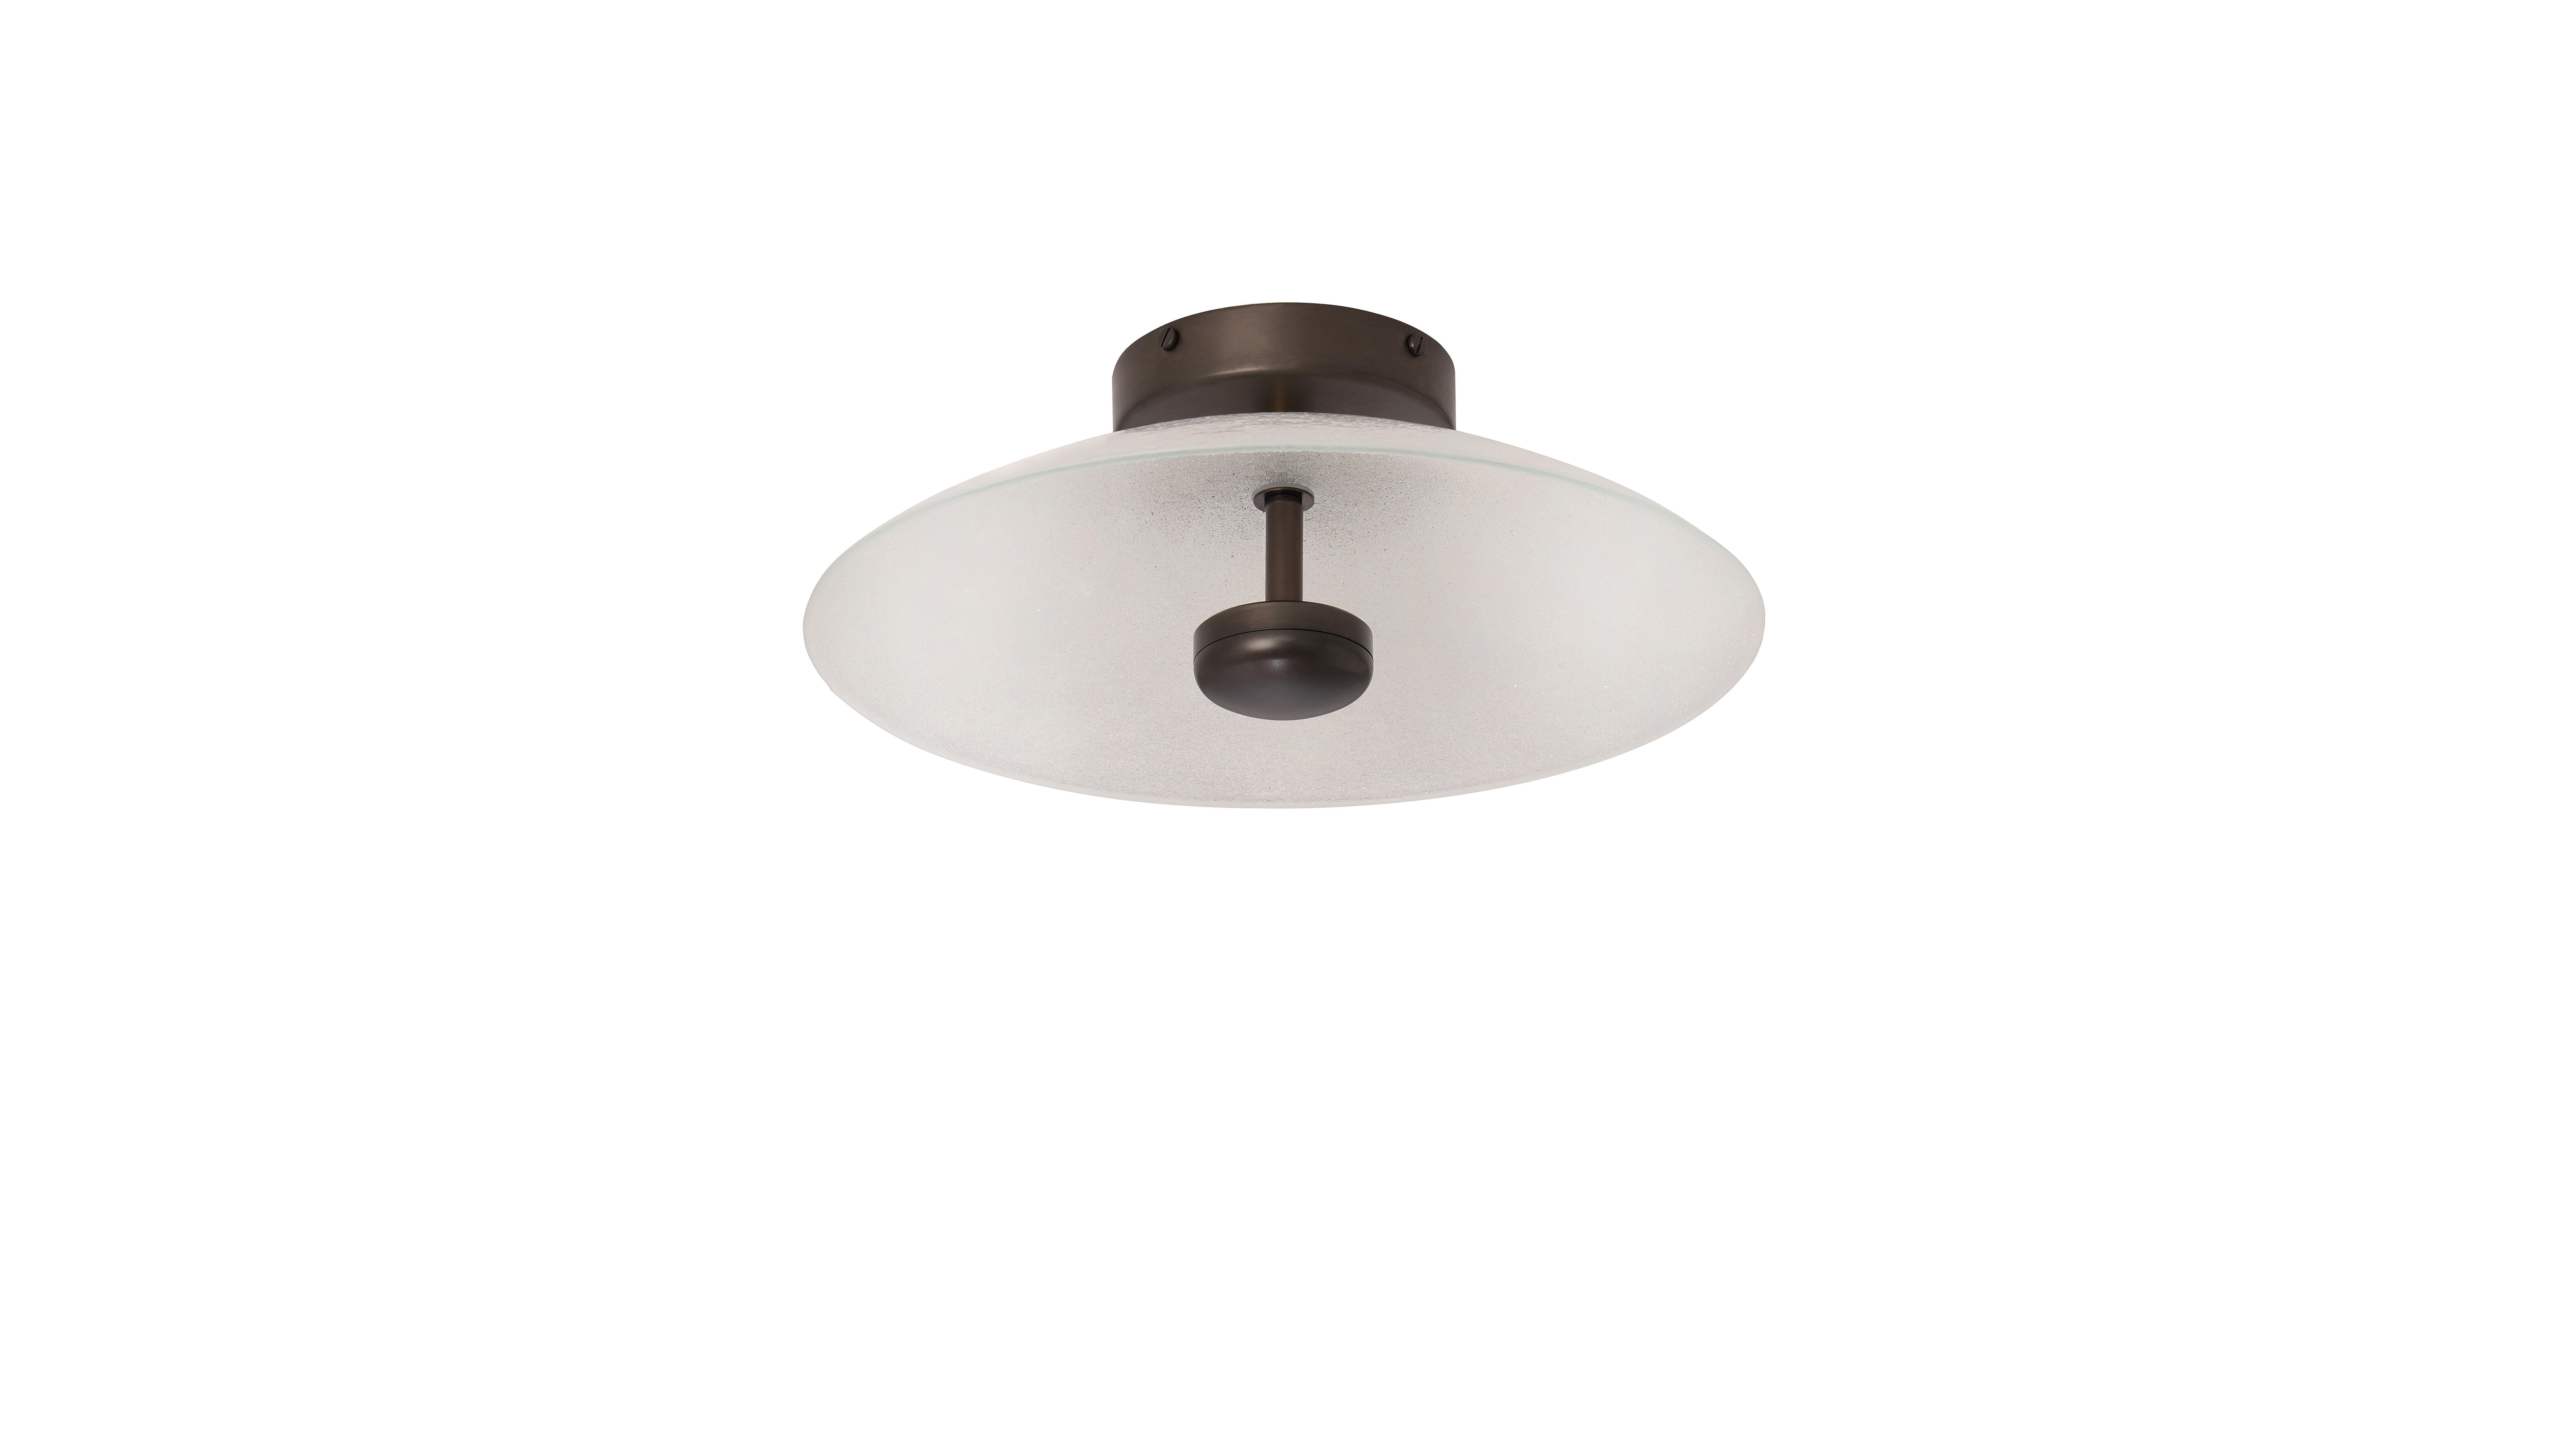 Cielo small ceiling lamp by CTO Lighting
Materials: Satin brass with hand fritted glass
Dimensions: W 31.5 x D 31.5 x H 13 cm

Integrated LED - trailing dimmable - 8w - 2700k 
Weight 3.5kg (7.7lbs)
Mounts onto 4” junction box

All our lamps